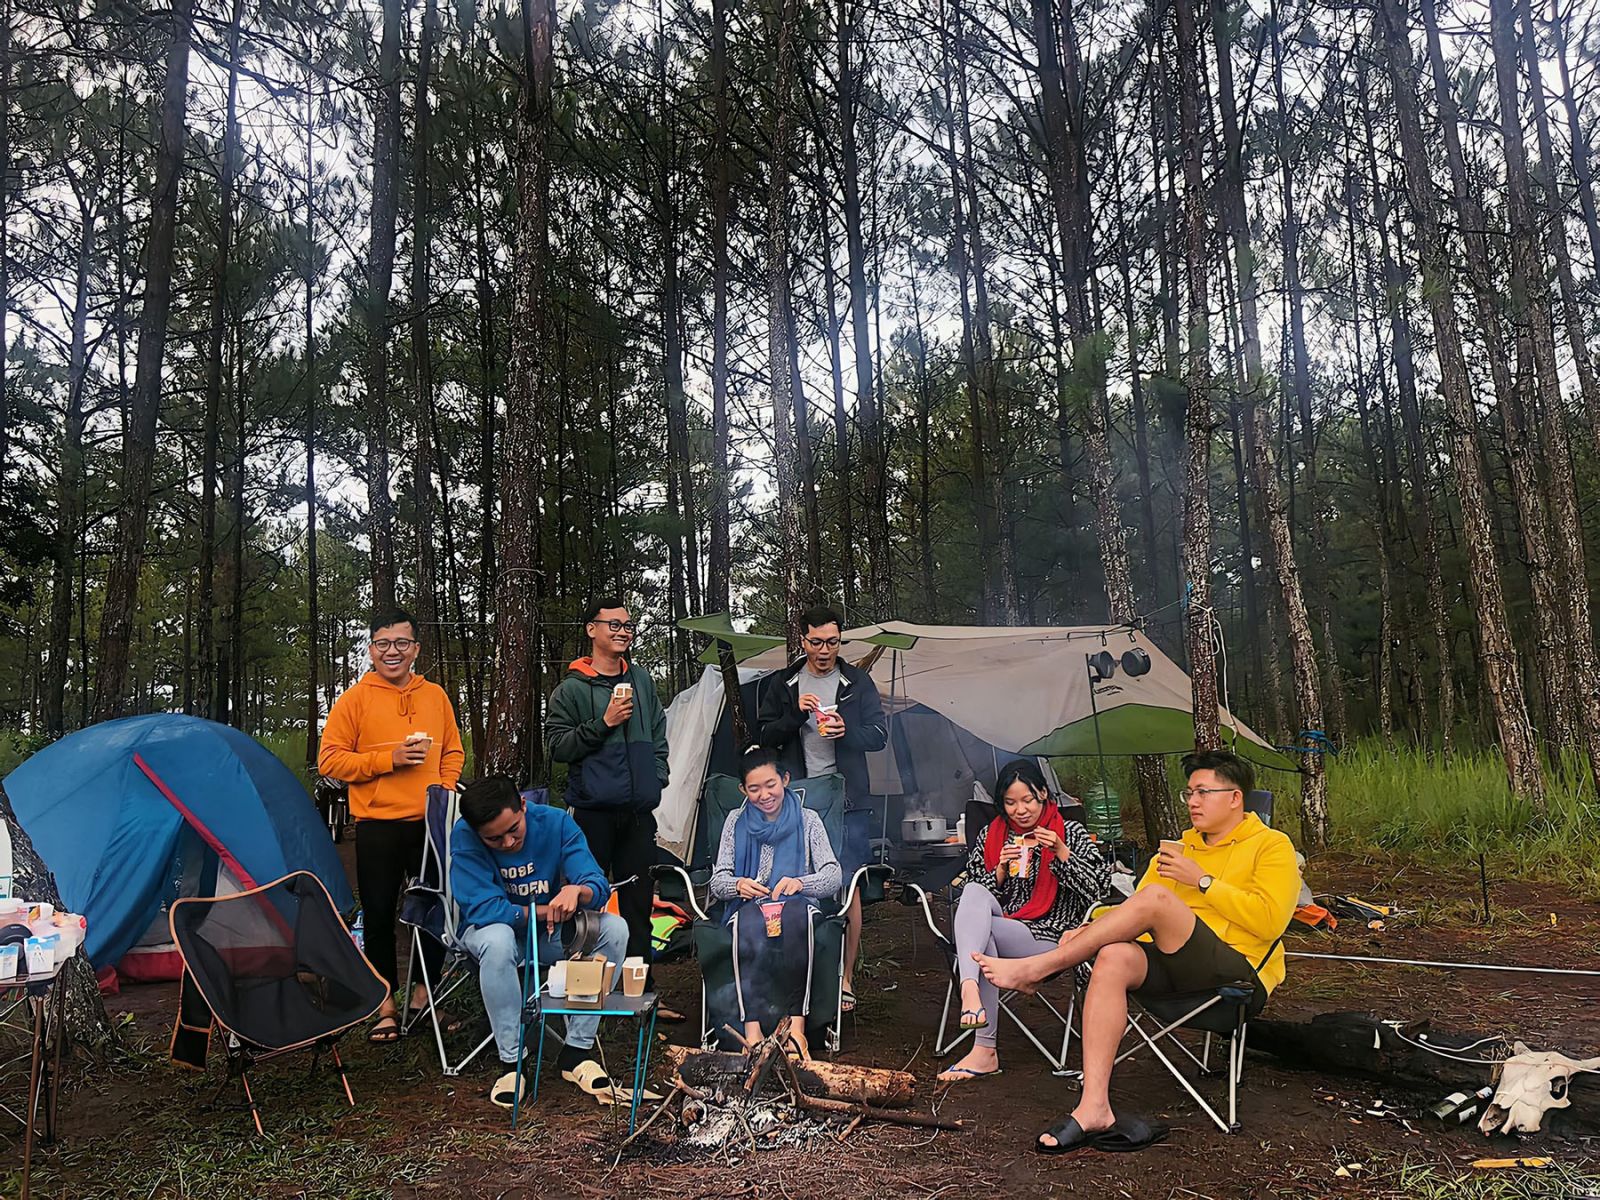 Nhi and her friends camping in the pine forest